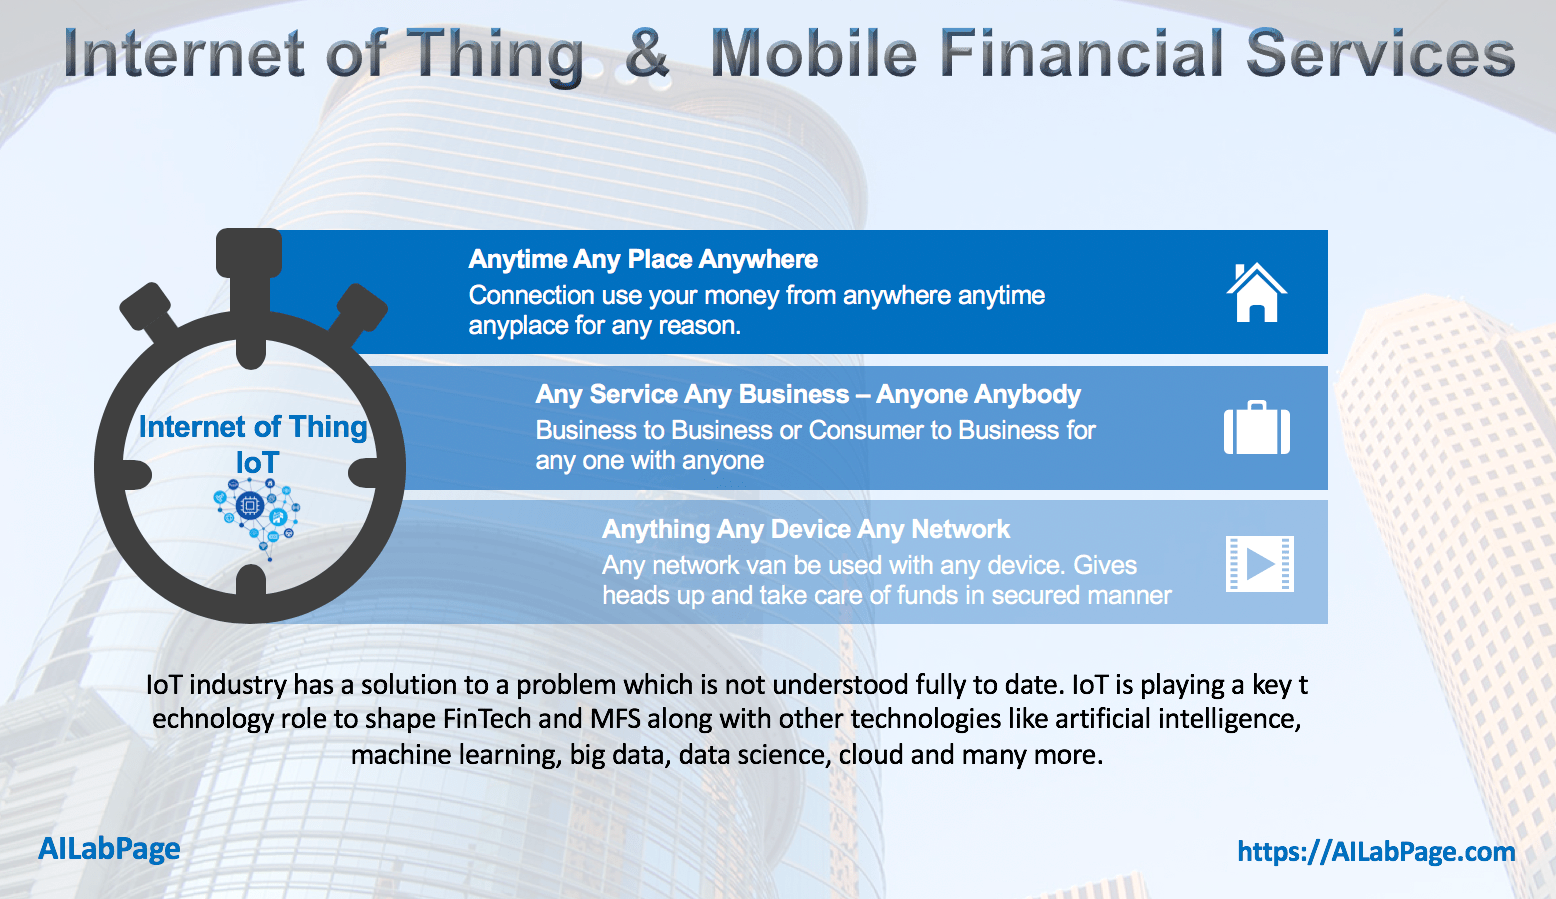 Mobile Financial Services - IoT As A Key Technology